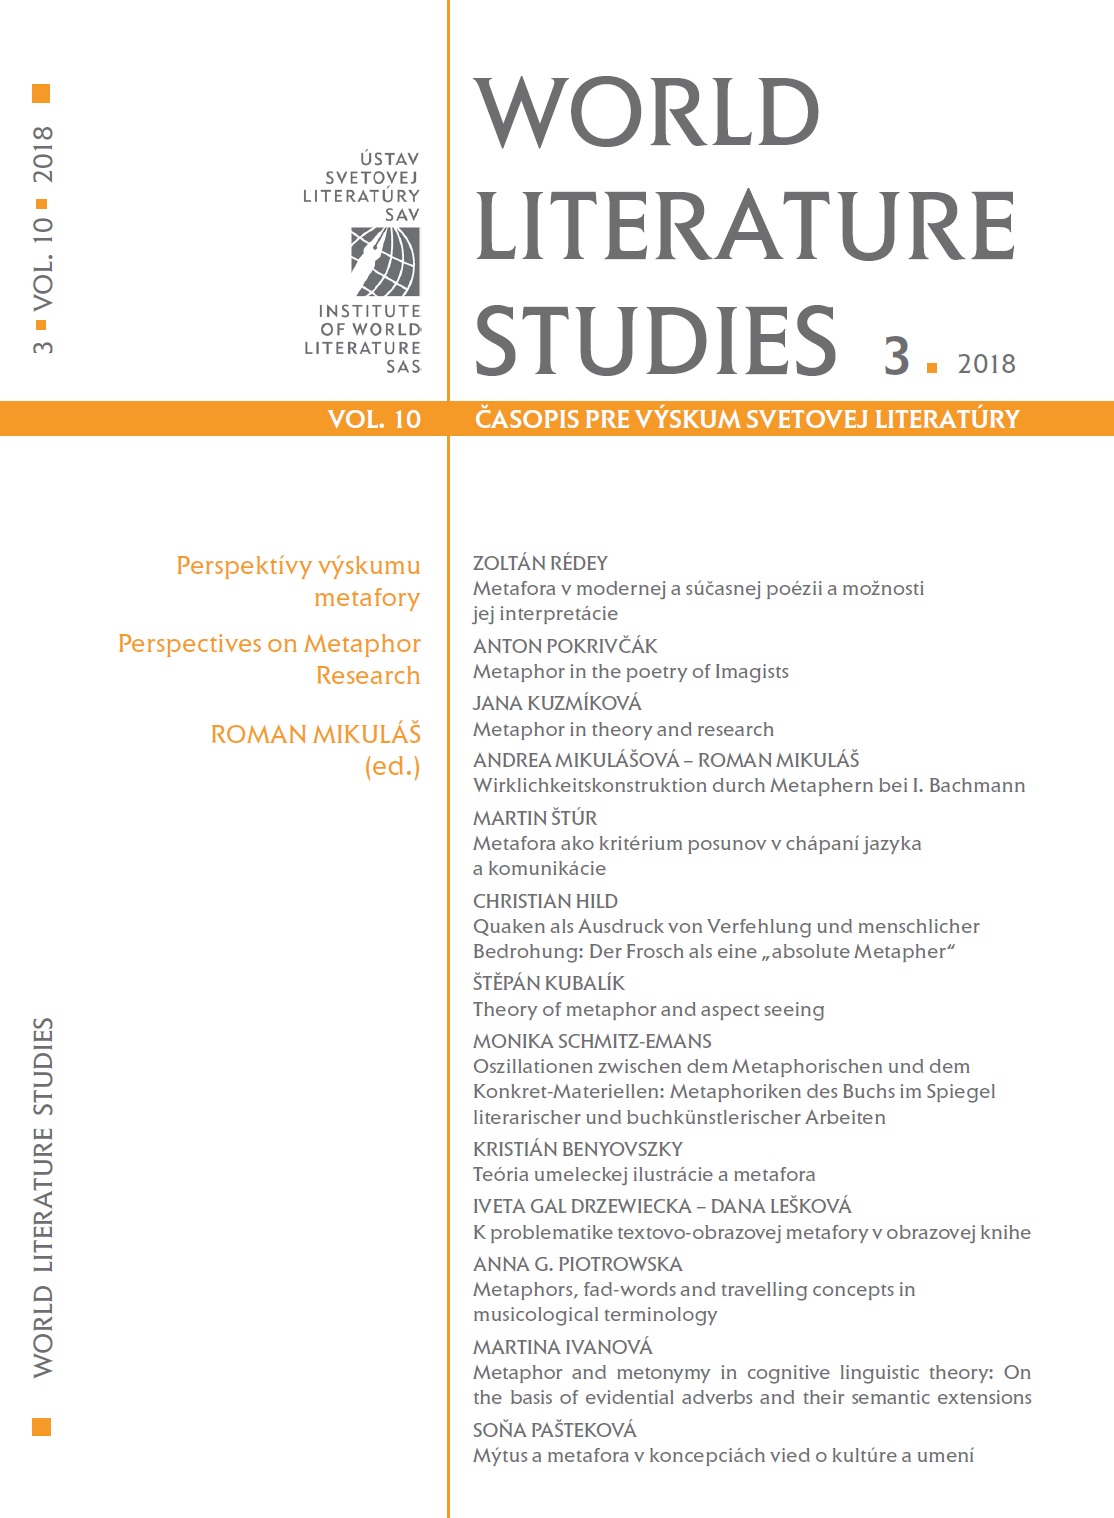 Myth and metaphor in concepts of cultural and literary studies Cover Image